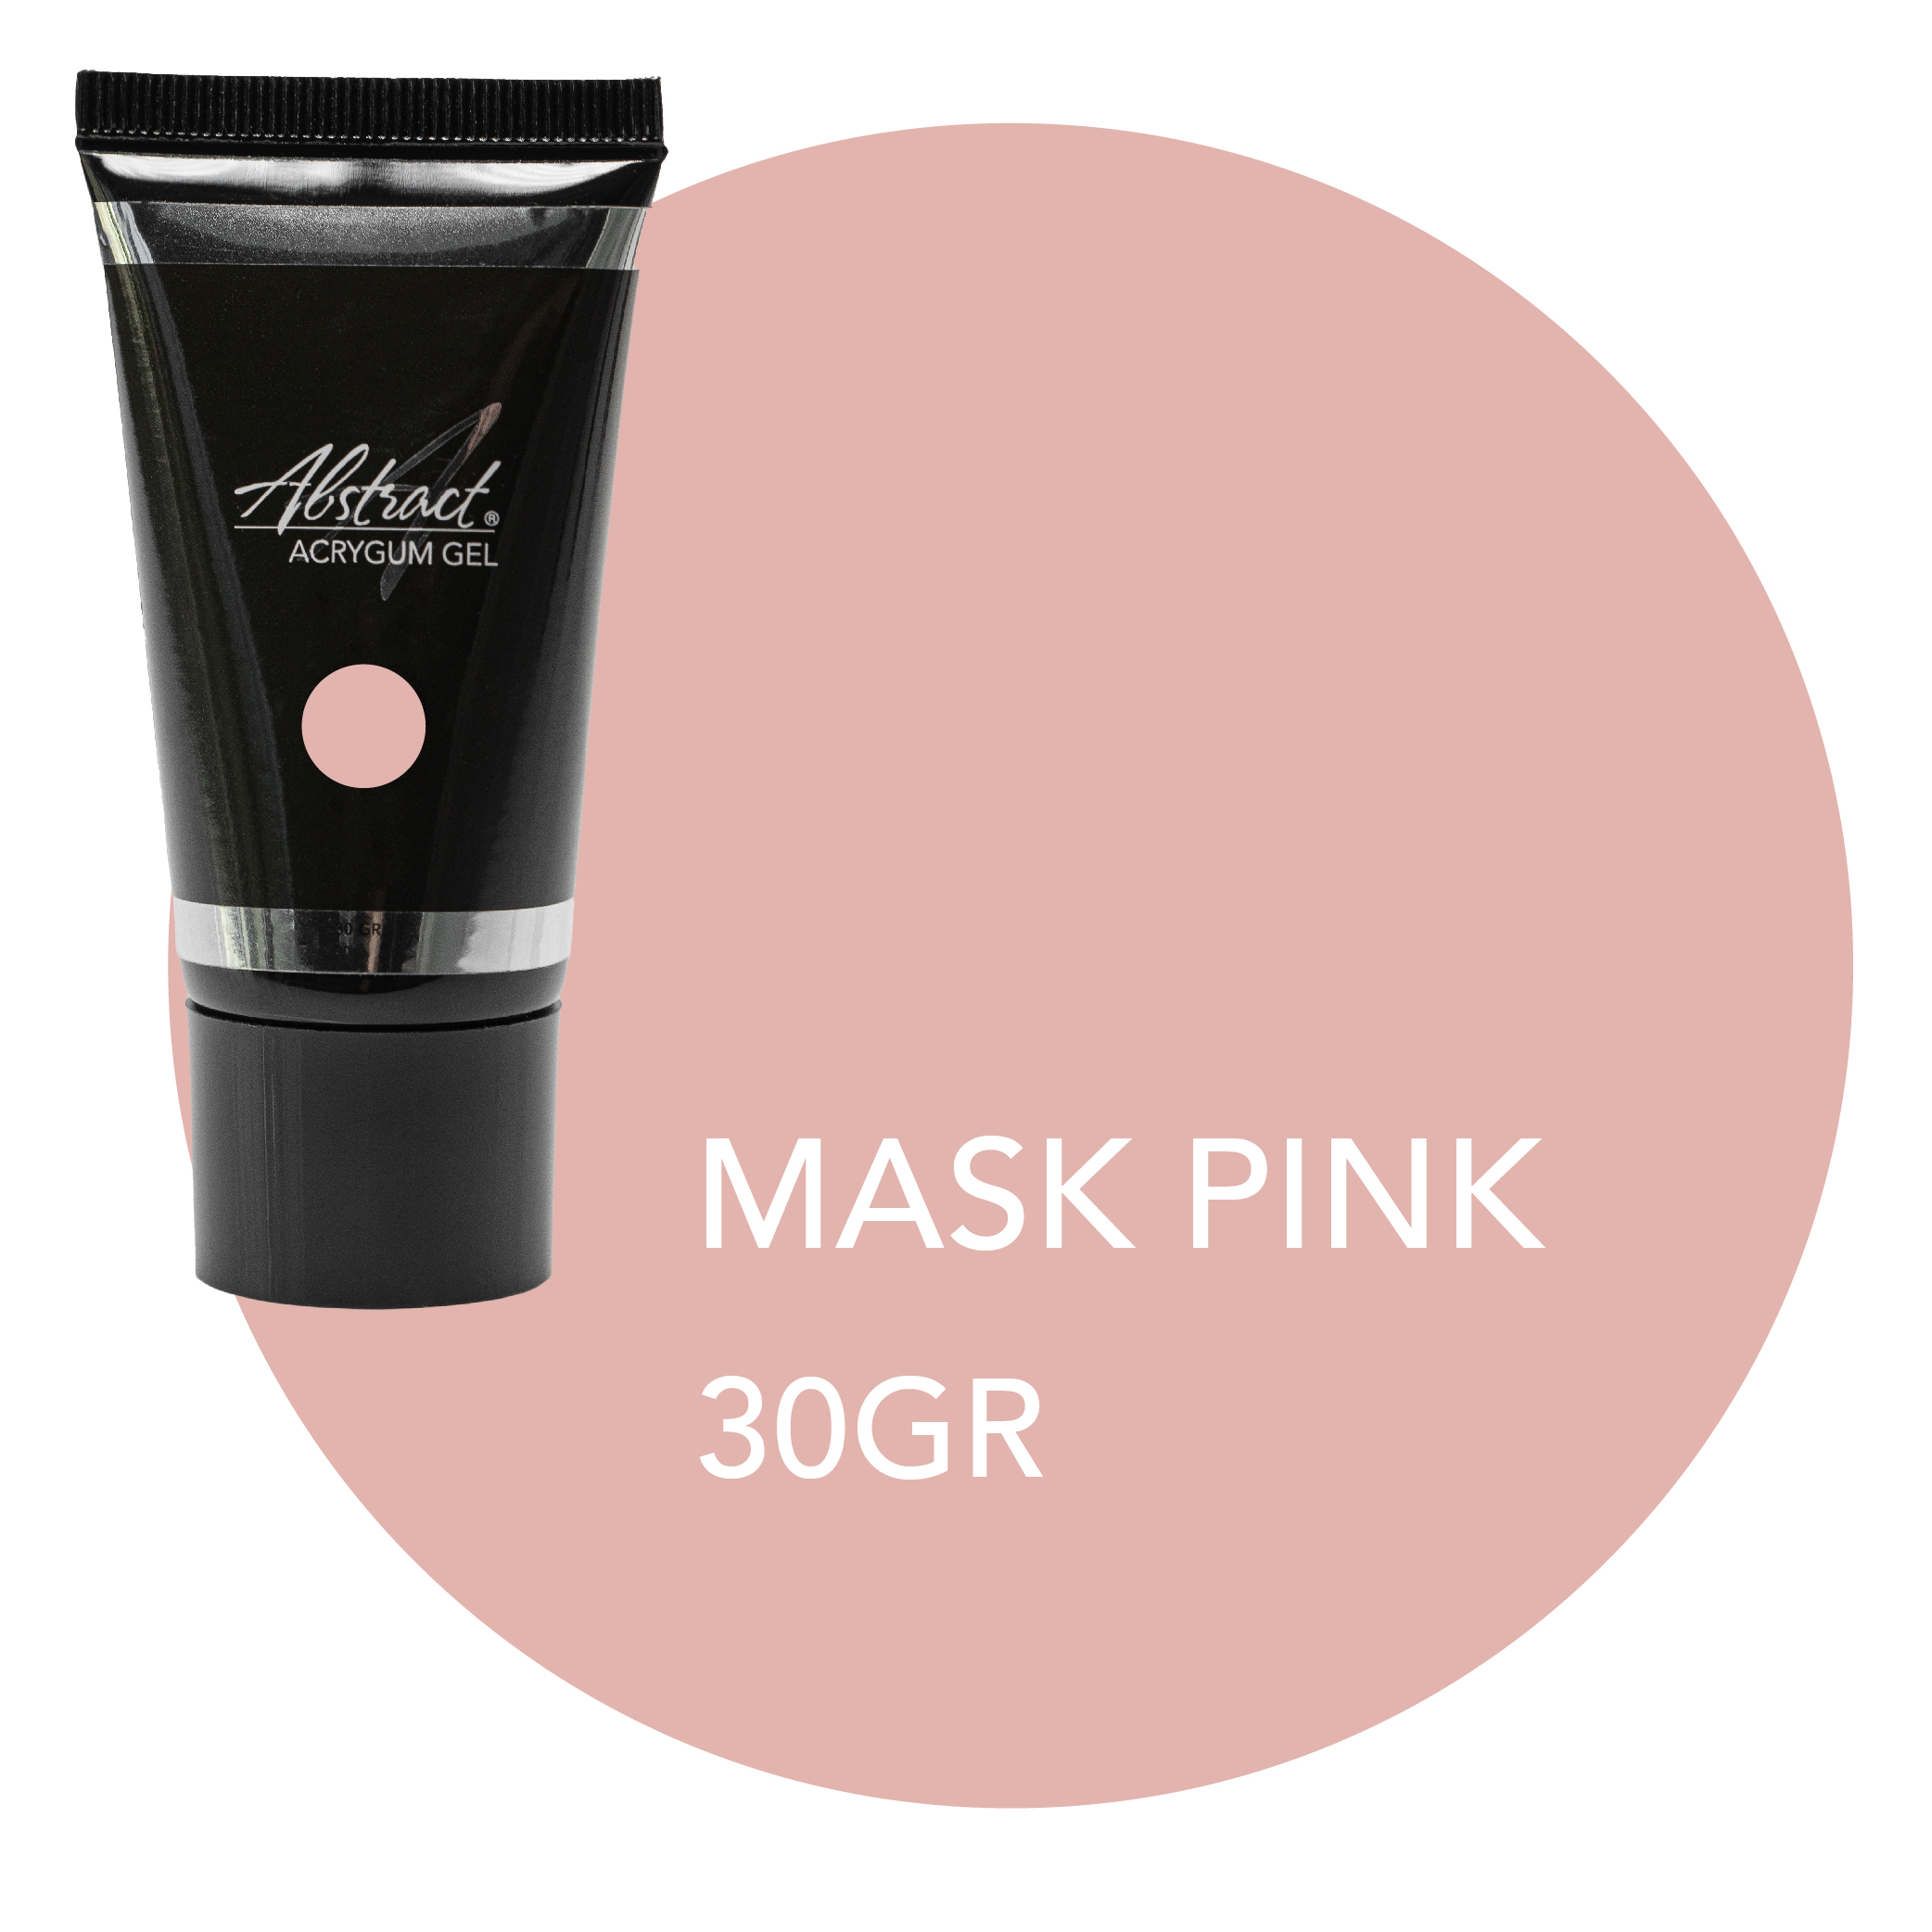 AcryGum MASK PINK 30gr (tube), Abstract | 312628